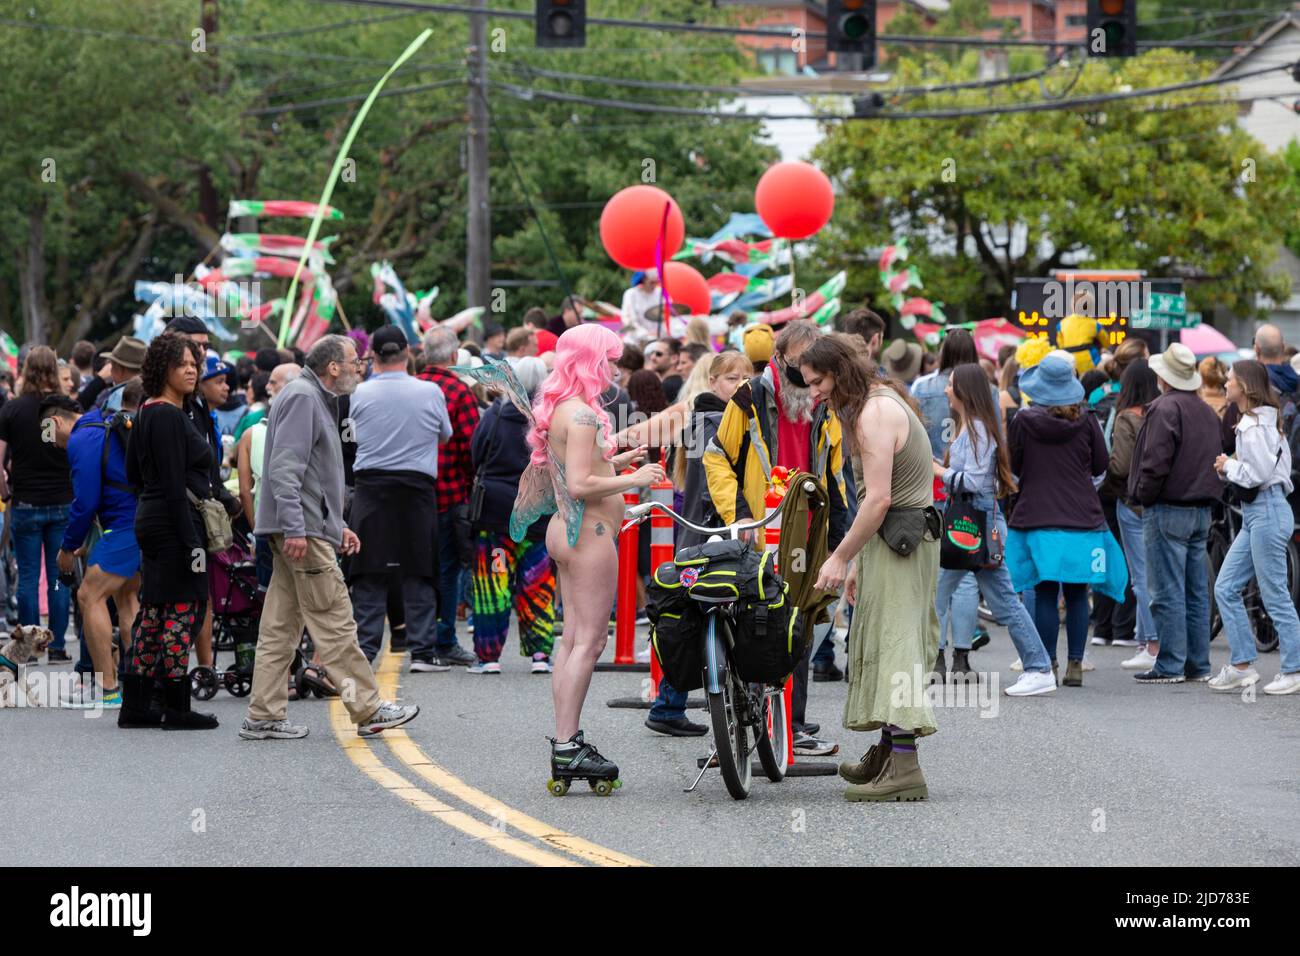 Seattle, Washington, USA. 18th June, 2022. Spectators line the streets at the Fremont Solstice Parade. The iconic, annual parade returned after a three-year hiatus due to the coronavirus pandemic. Credit: Paul Christian Gordon/Alamy Live News Stock Photo